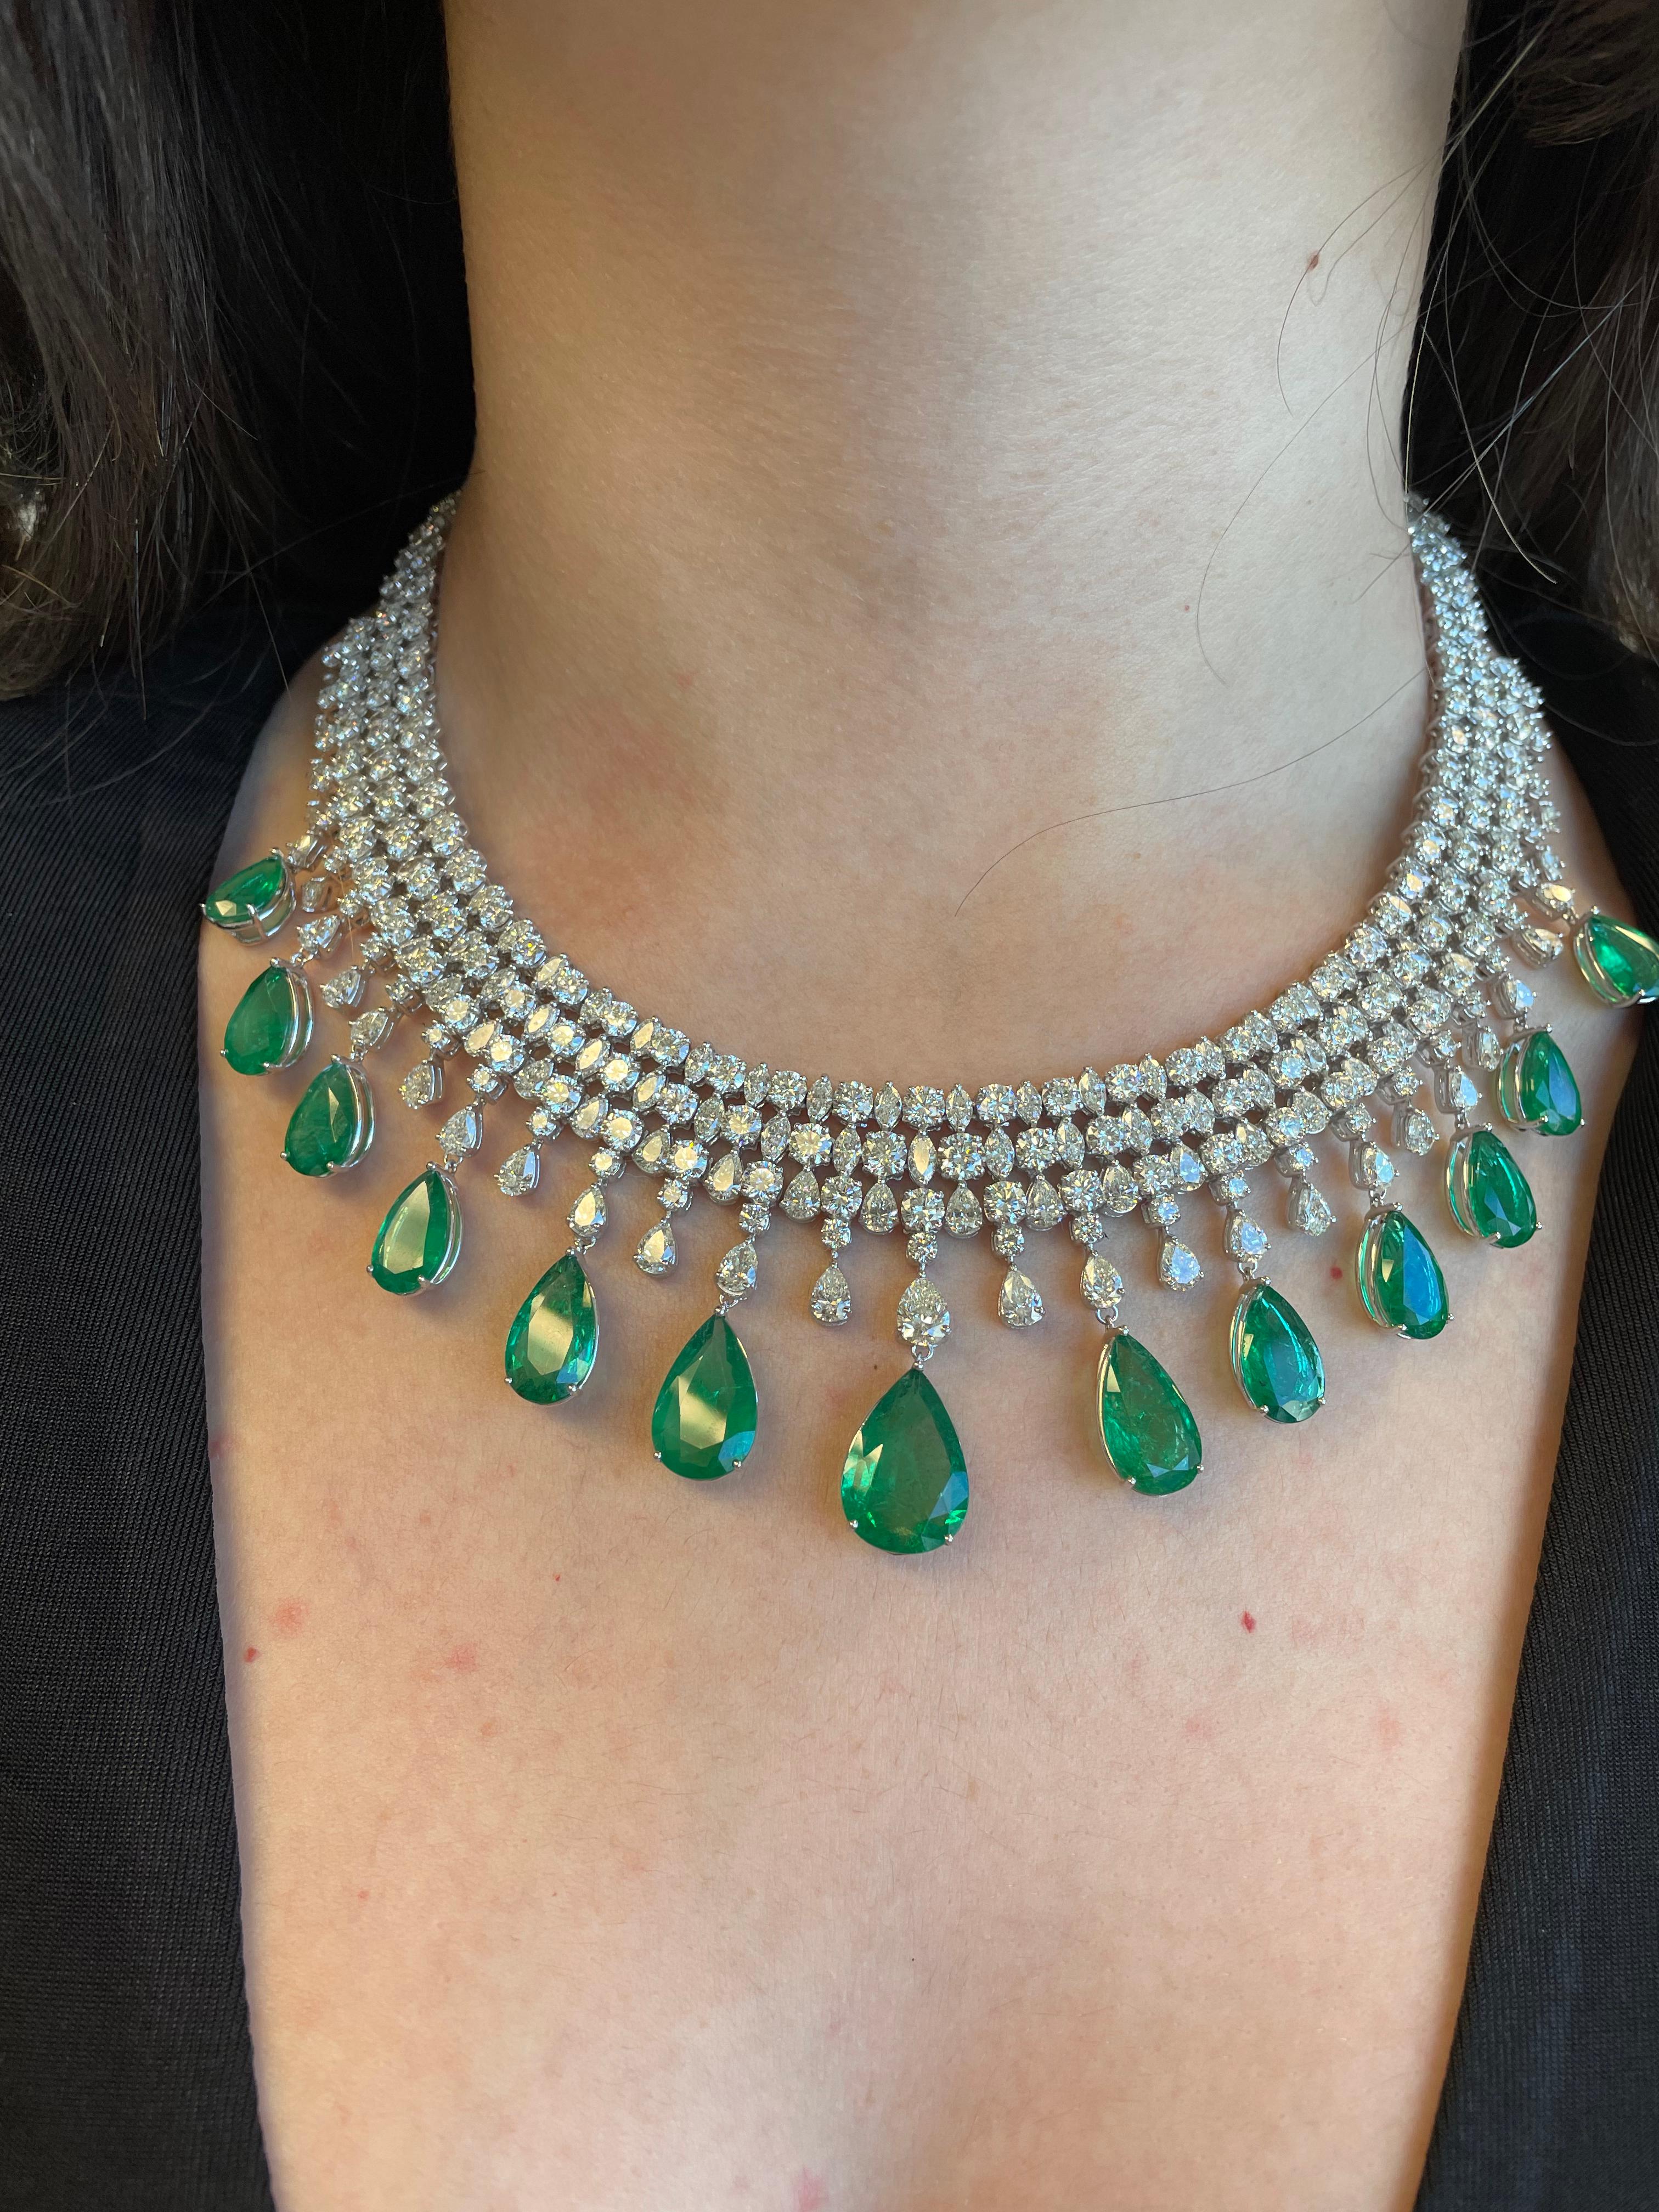 Sensational grand 114.87ct emerald and diamond necklace. An important necklace, typically created by the major jewelry houses or seen at auction. High jewelry by Alexander Beverly Hills.
13 pear shaped emeralds, 46.87 carats, apx F2. 282 round